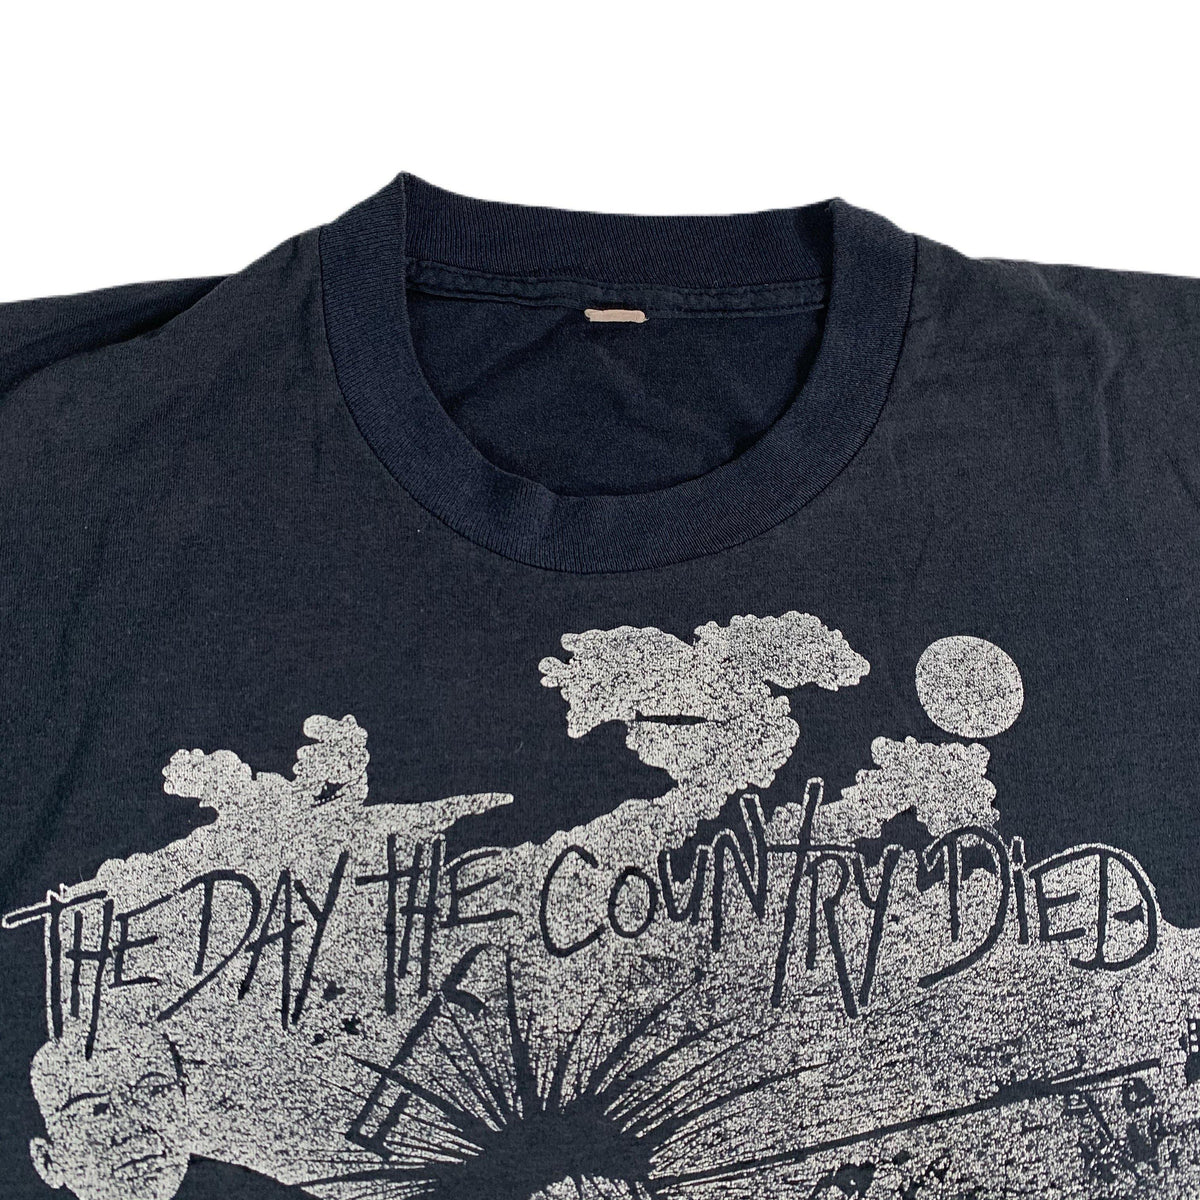 Vintage Subhumans &quot;The Day The Country Died&quot; T-Shirt - jointcustodydc